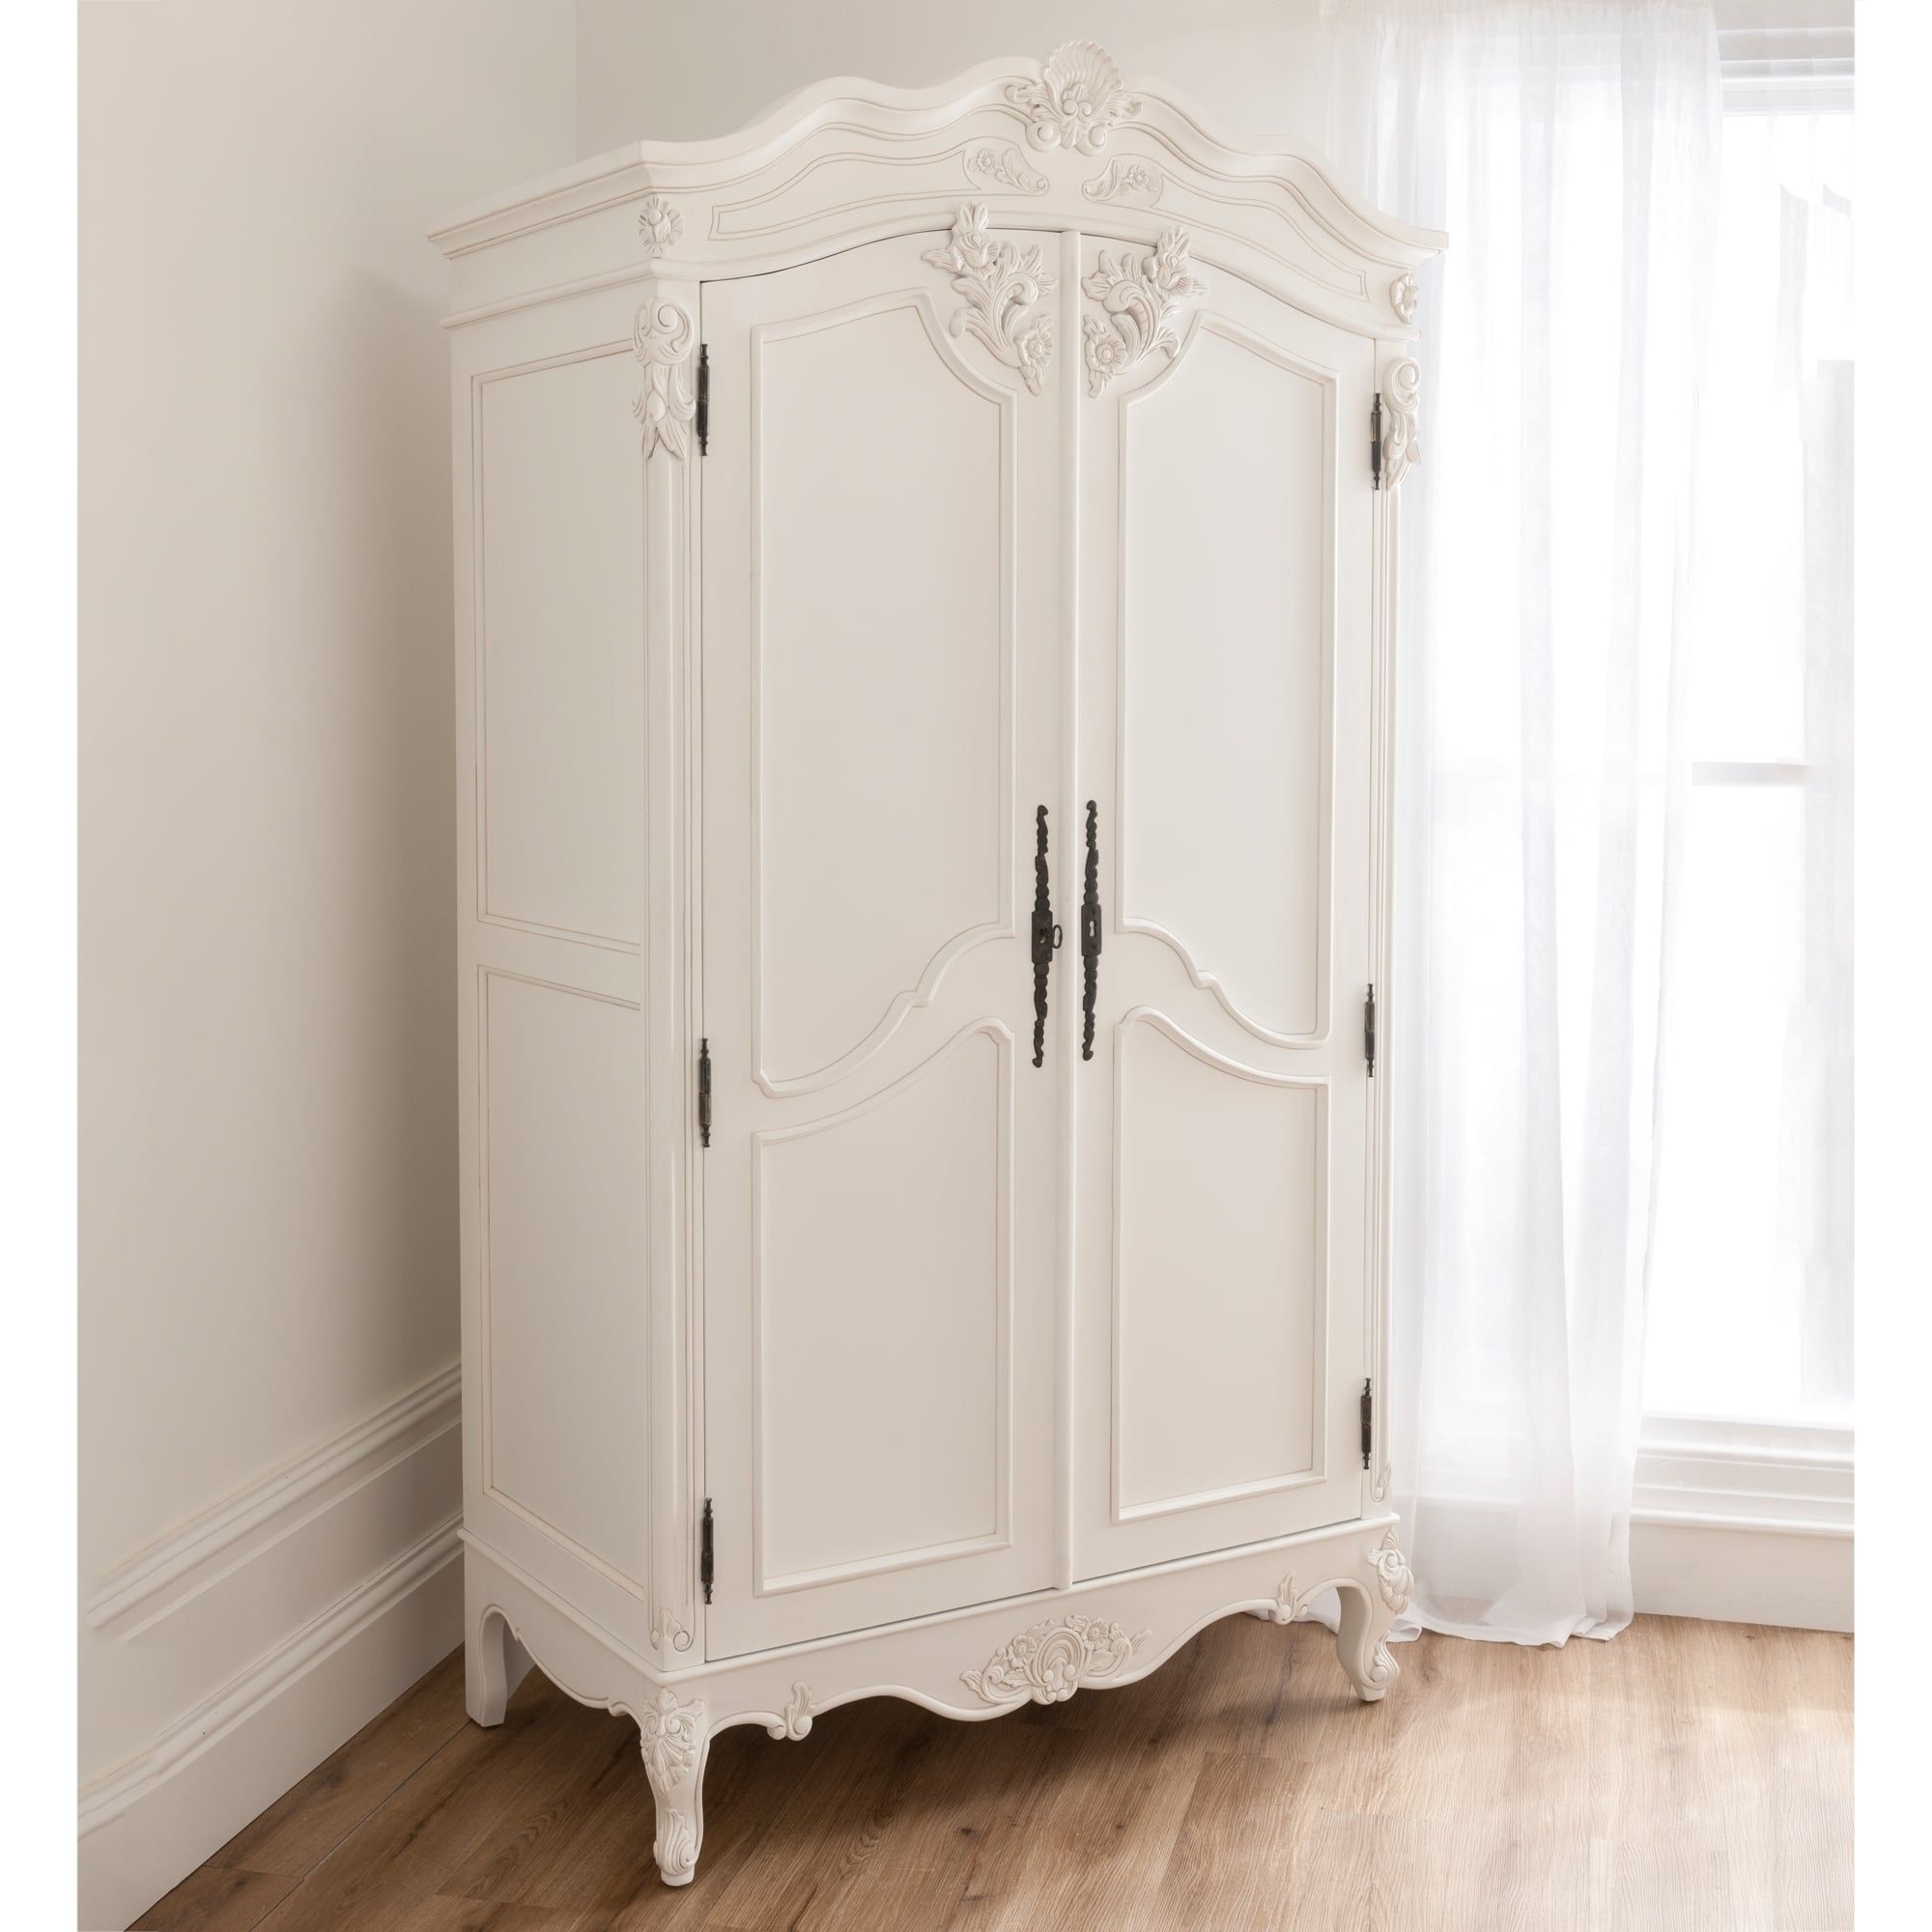 Baroque Antique French Wardrobe Is Available Online From For Preferred Antique French Wardrobes (View 8 of 15)